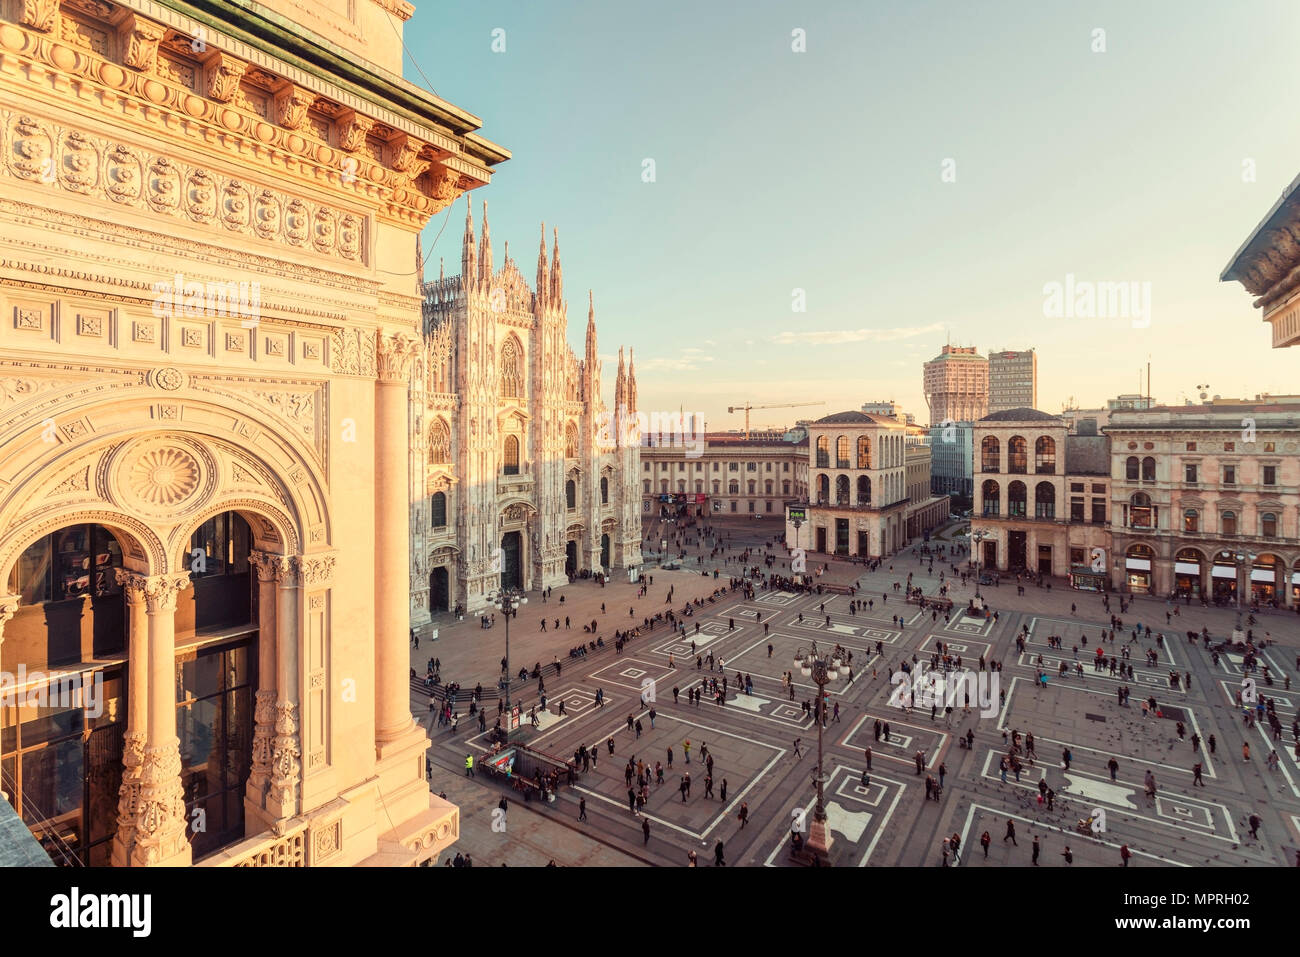 Italy, Lombardy, Piazza del Duomo in Milan seen from the Galleria Vittorio Emanuele II Stock Photo